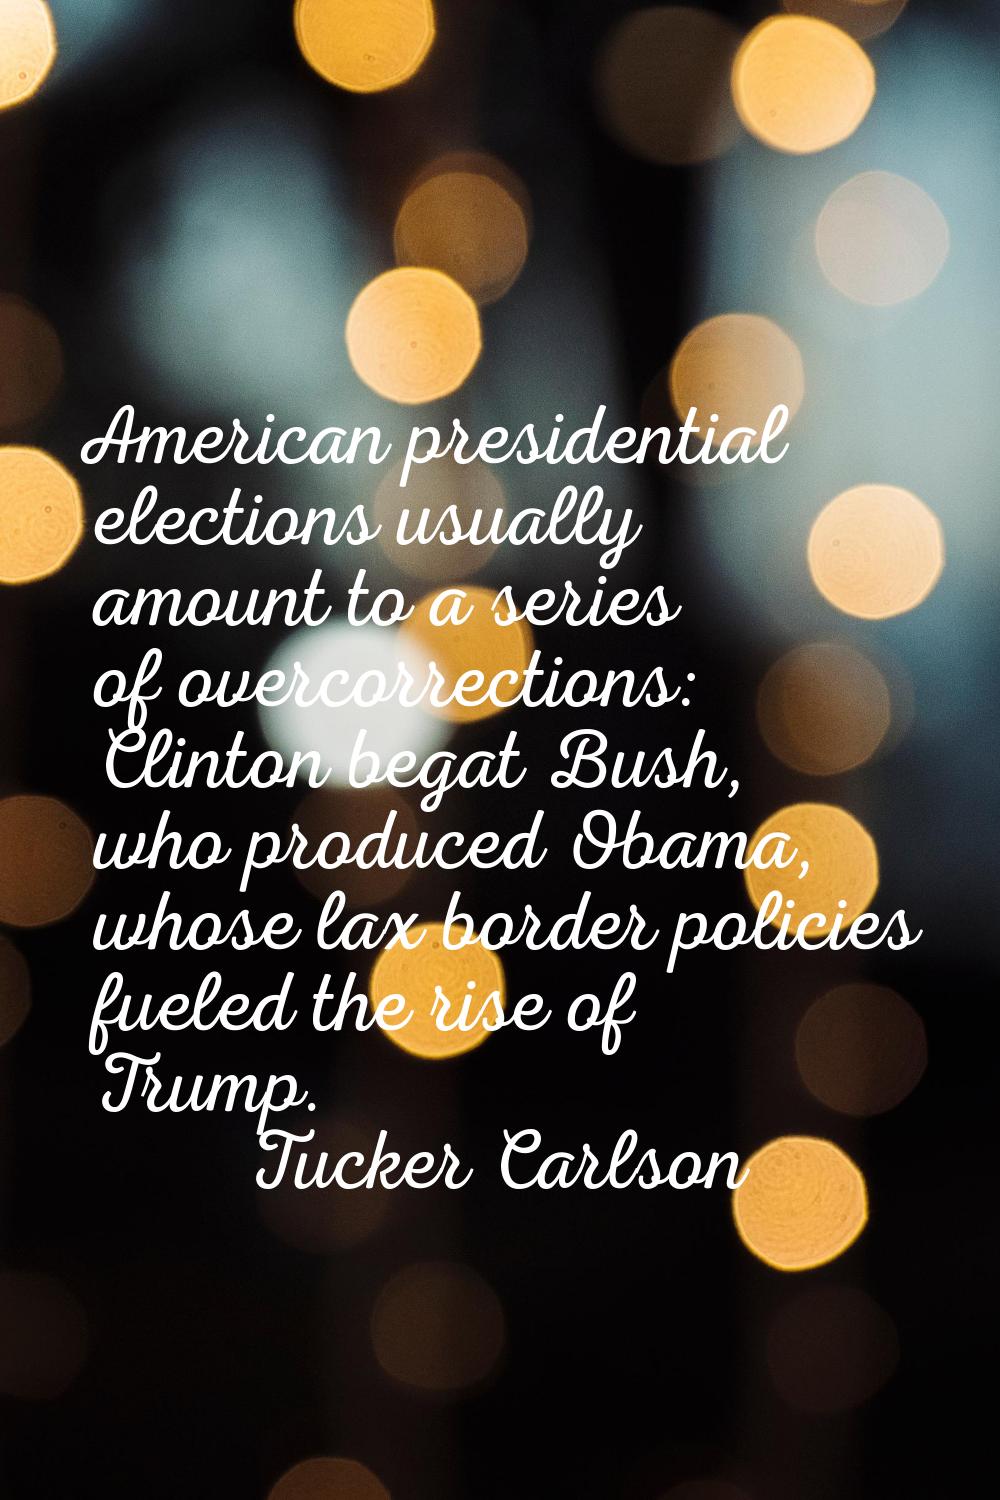 American presidential elections usually amount to a series of overcorrections: Clinton begat Bush, 